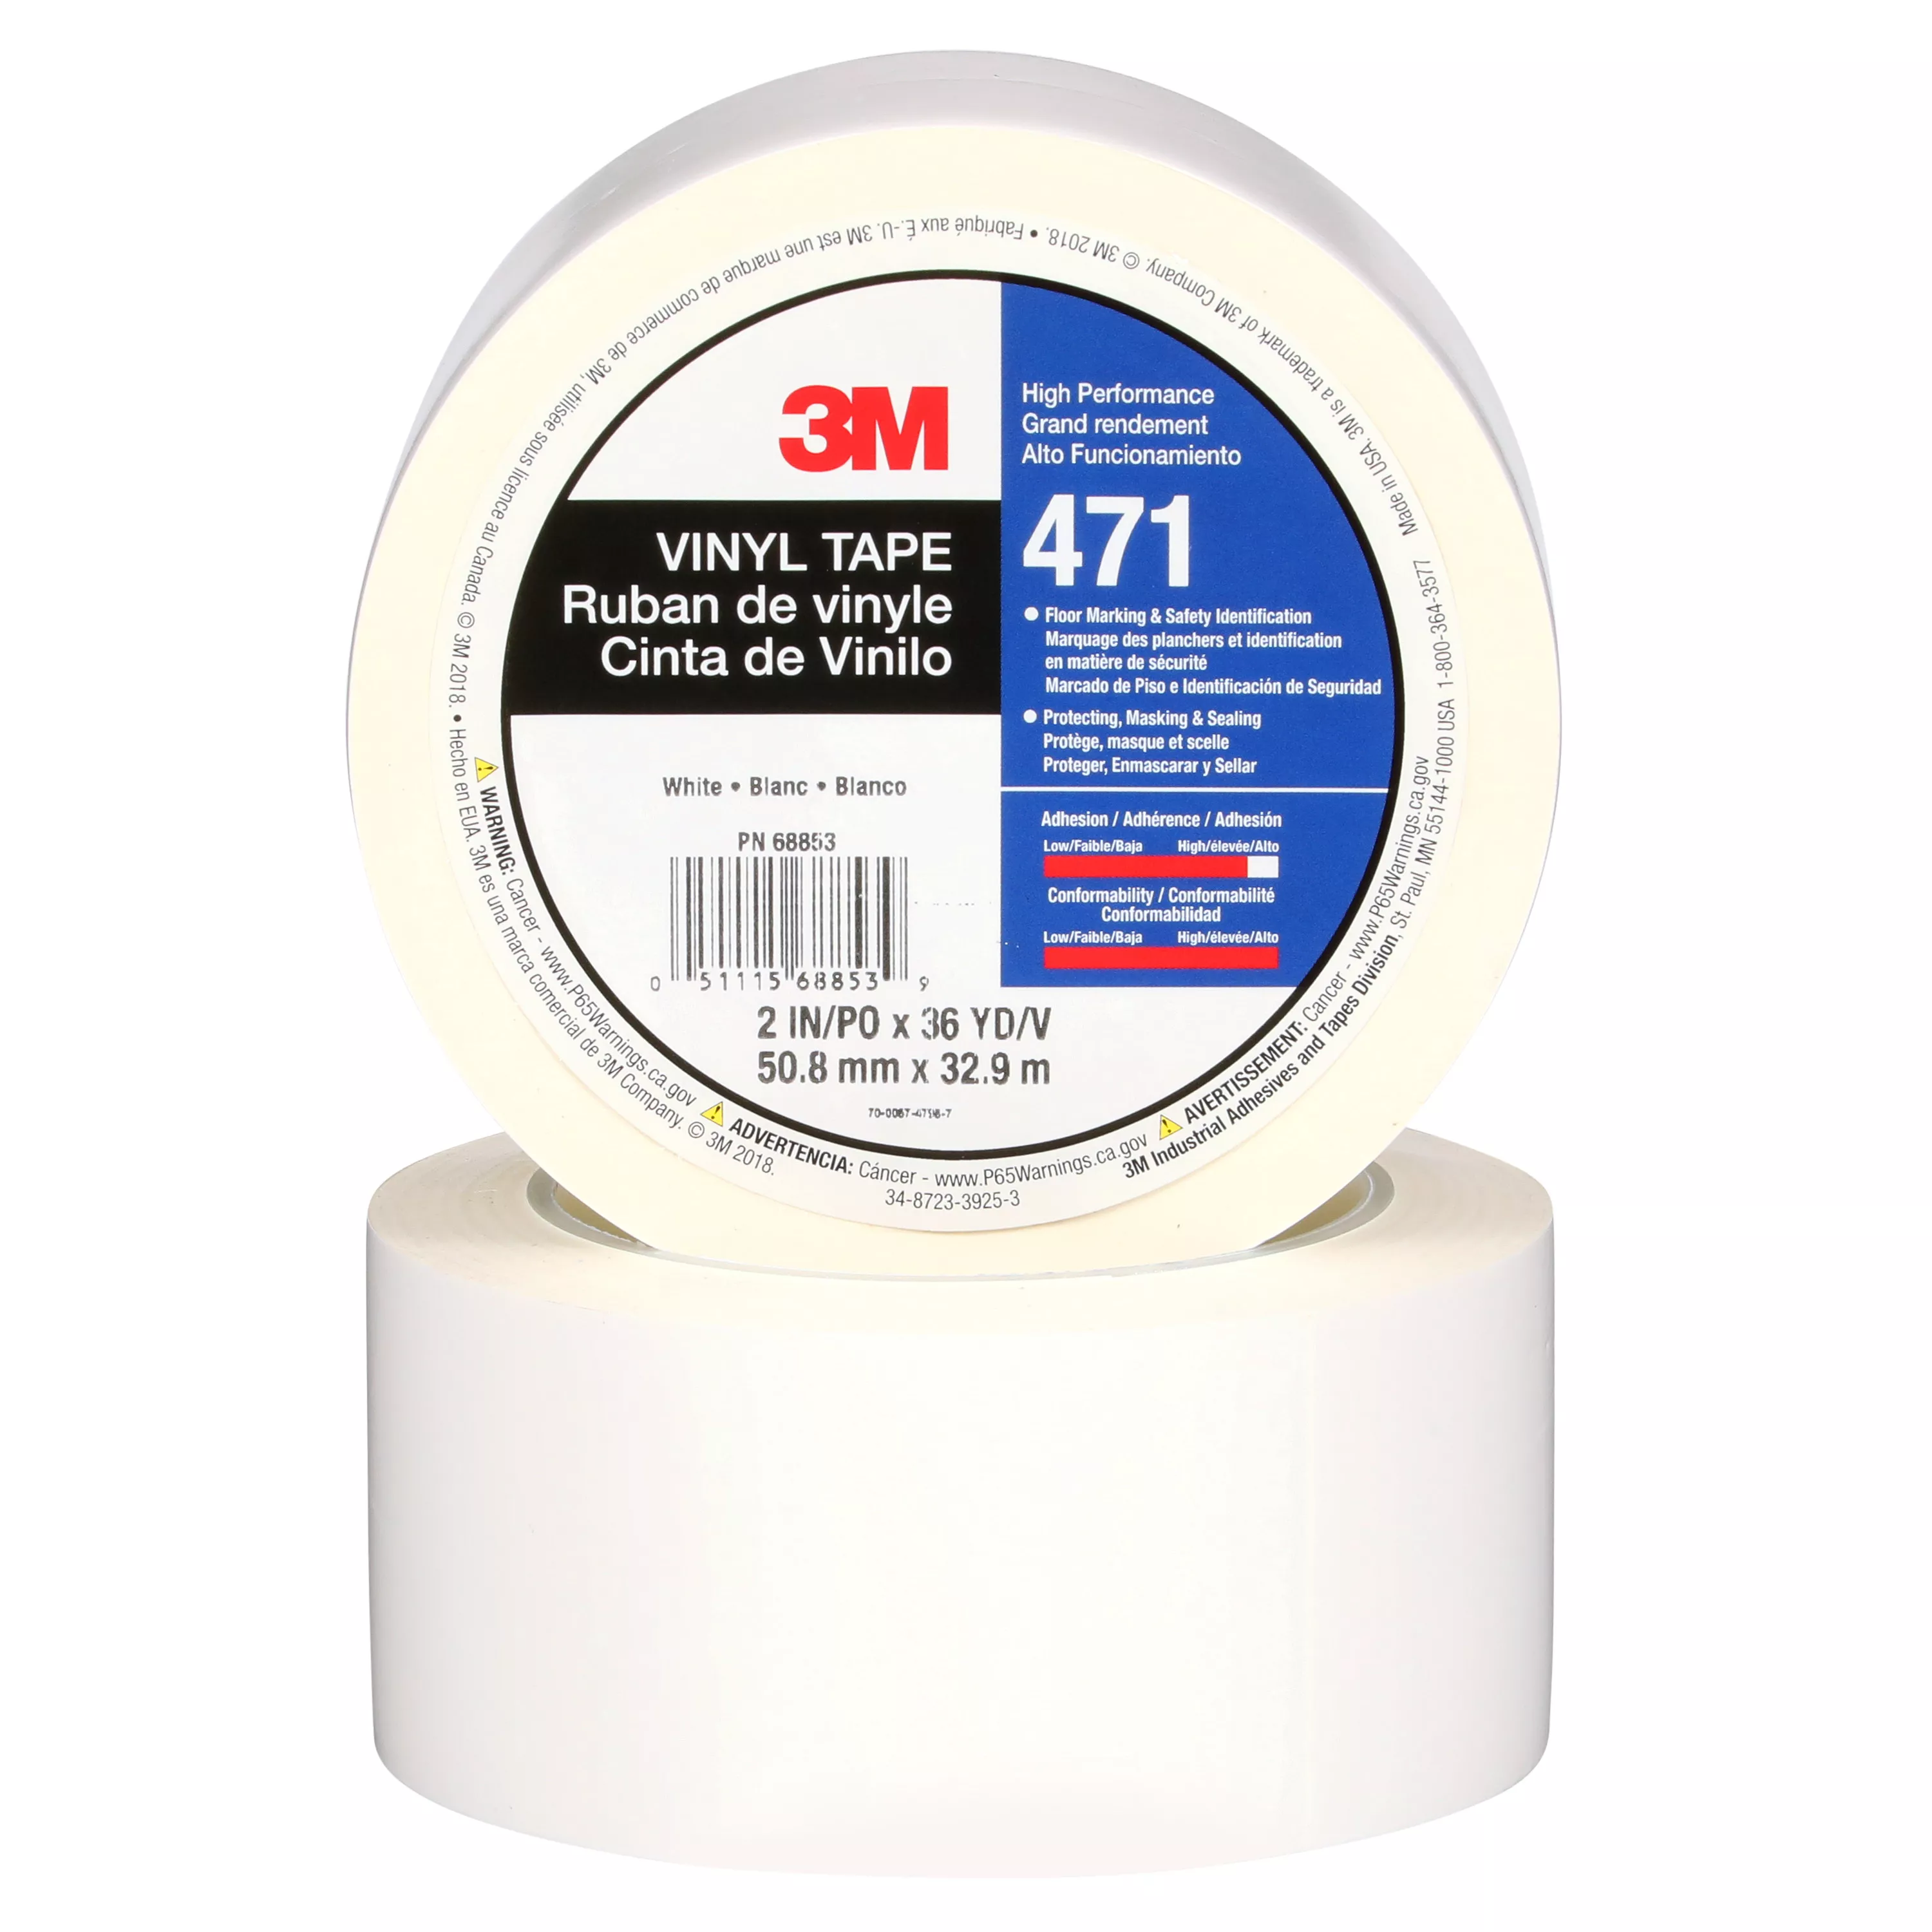 3M™ Vinyl Tape 471, White, 2 in x 36 yd, 5.2 mil, 24 Roll/Case,
Individually Wrapped Conveniently Packaged